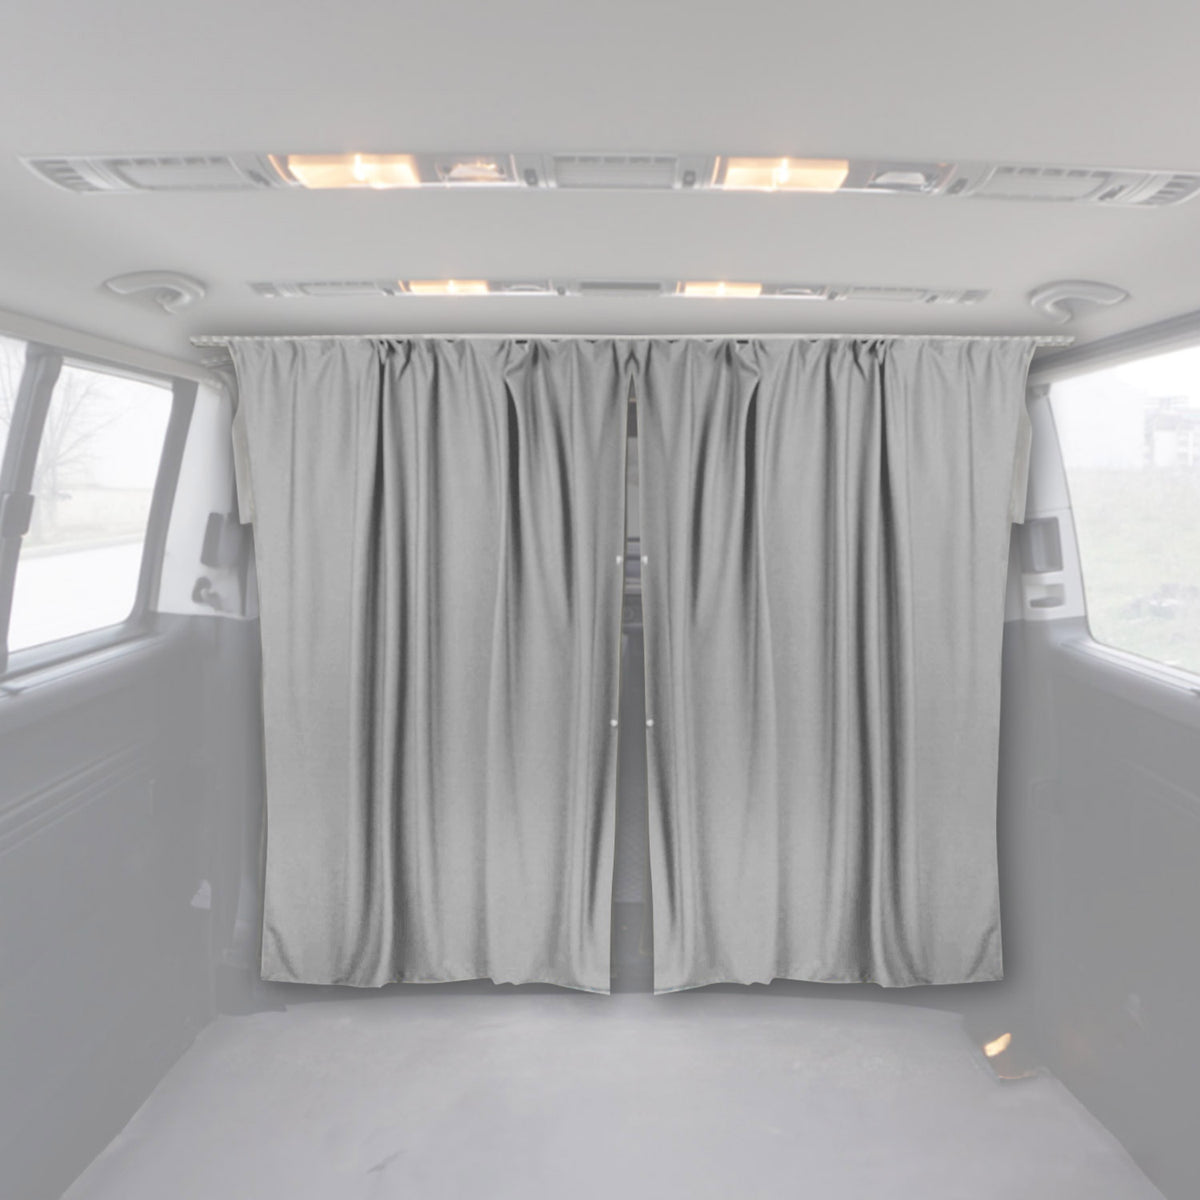 Driver's cab curtains sun protection for Fiat Scudo gray 2 pieces